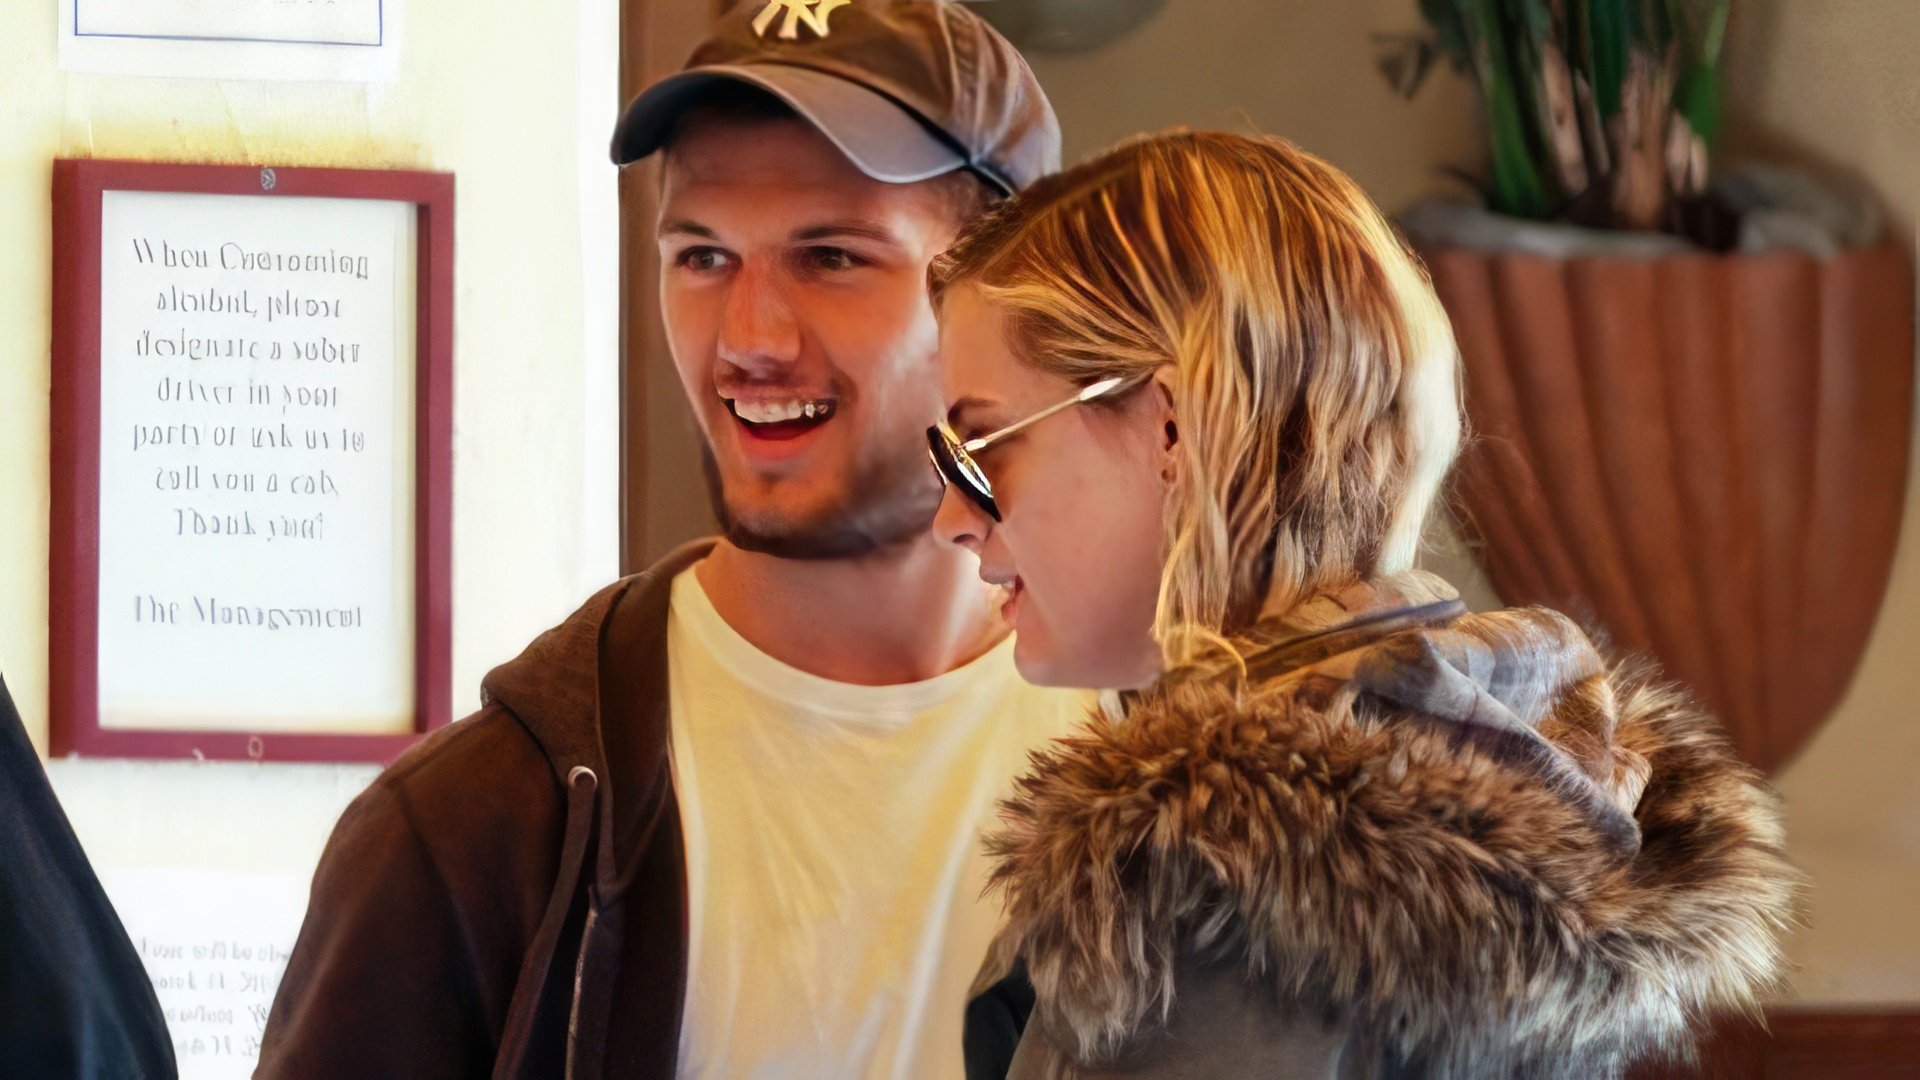 Relationships Riley Keough with Alex Pettyfer had lasted for two years